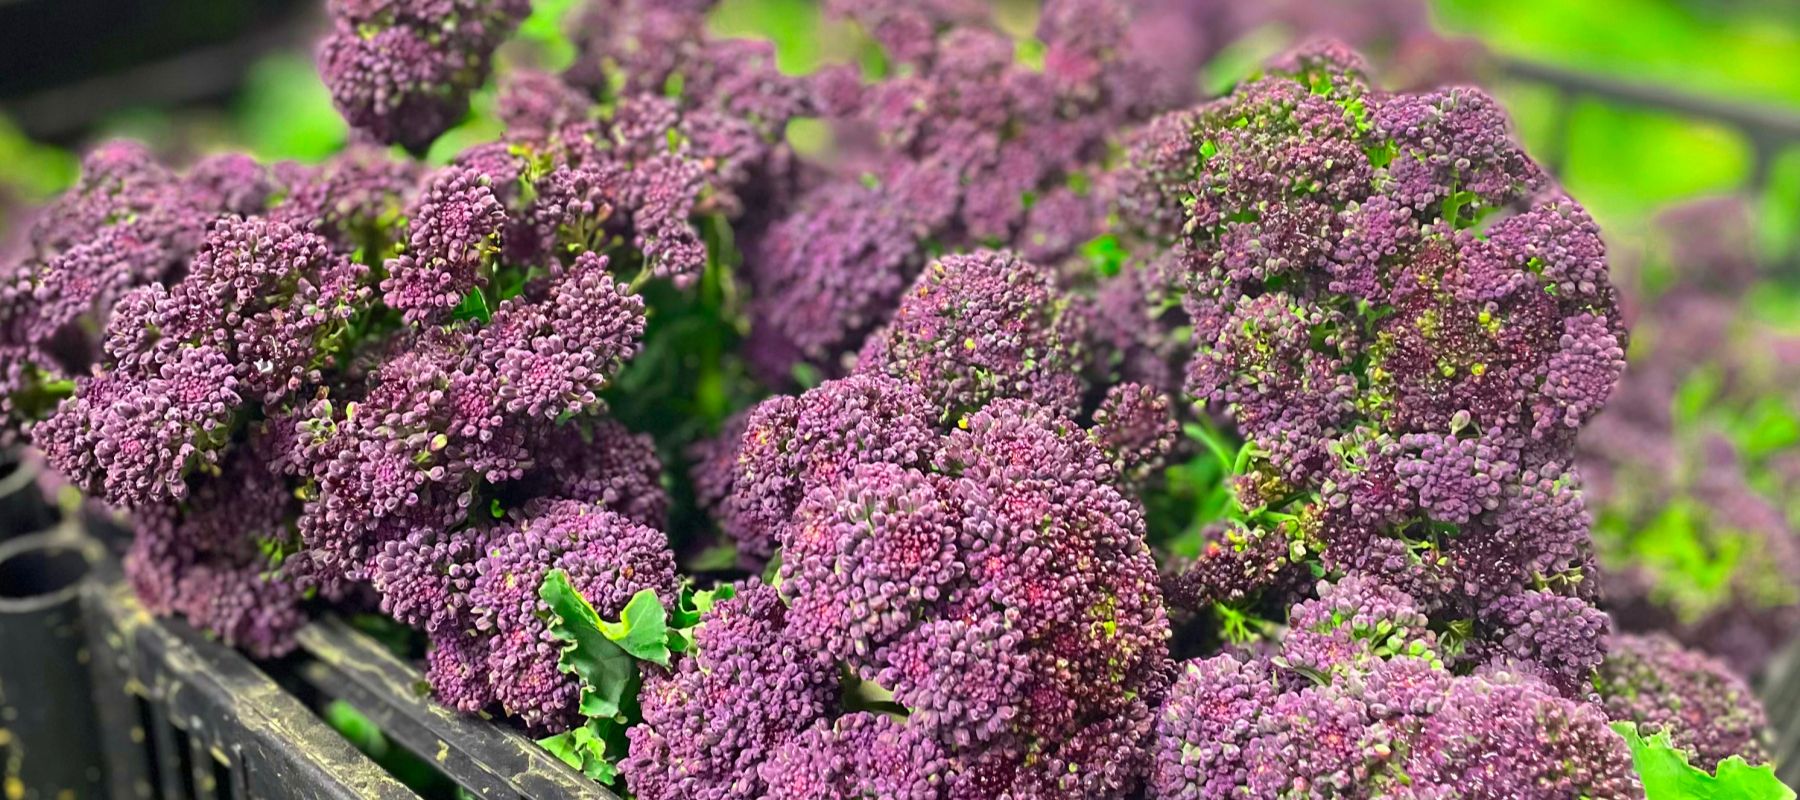 Our local purple sprouted broccoli